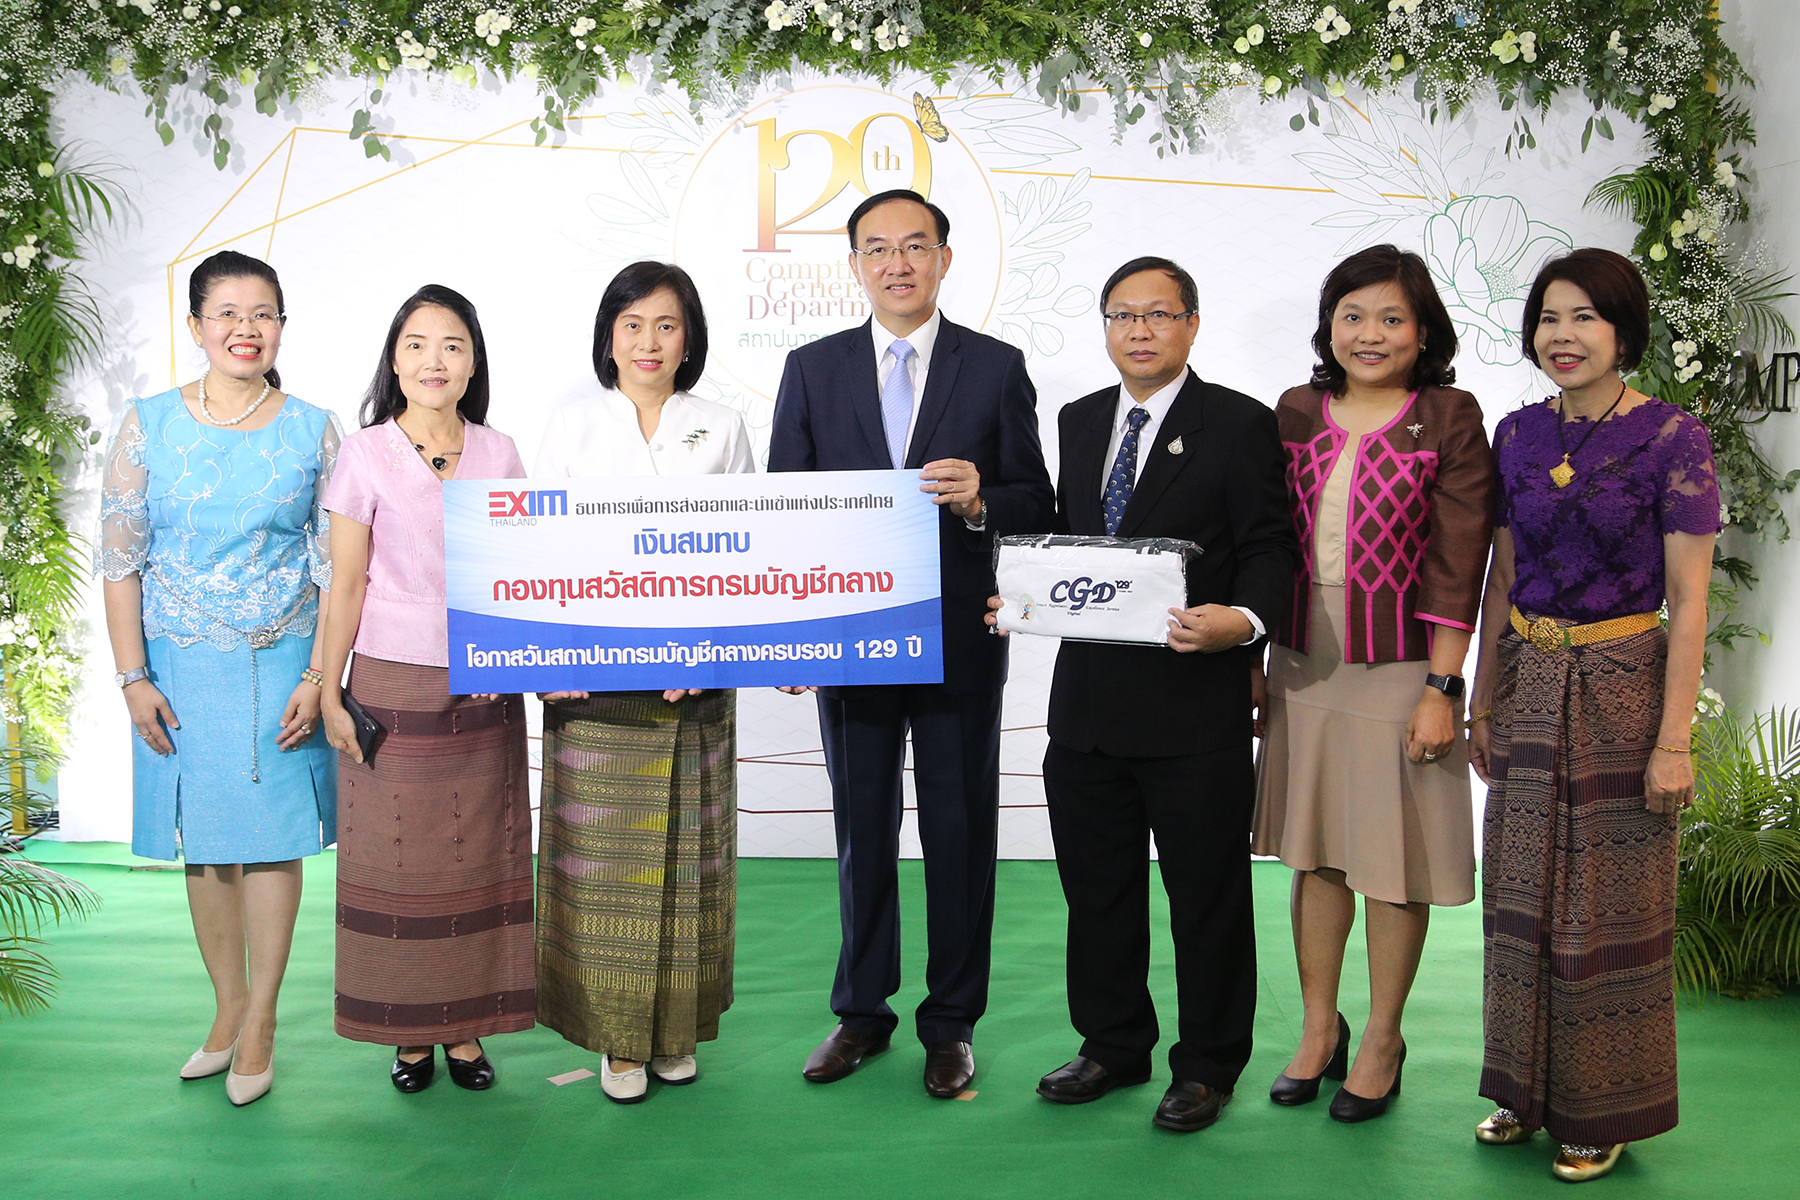 EXIM Thailand Congratulates 129th Anniversary of  the Comptroller General’s Department